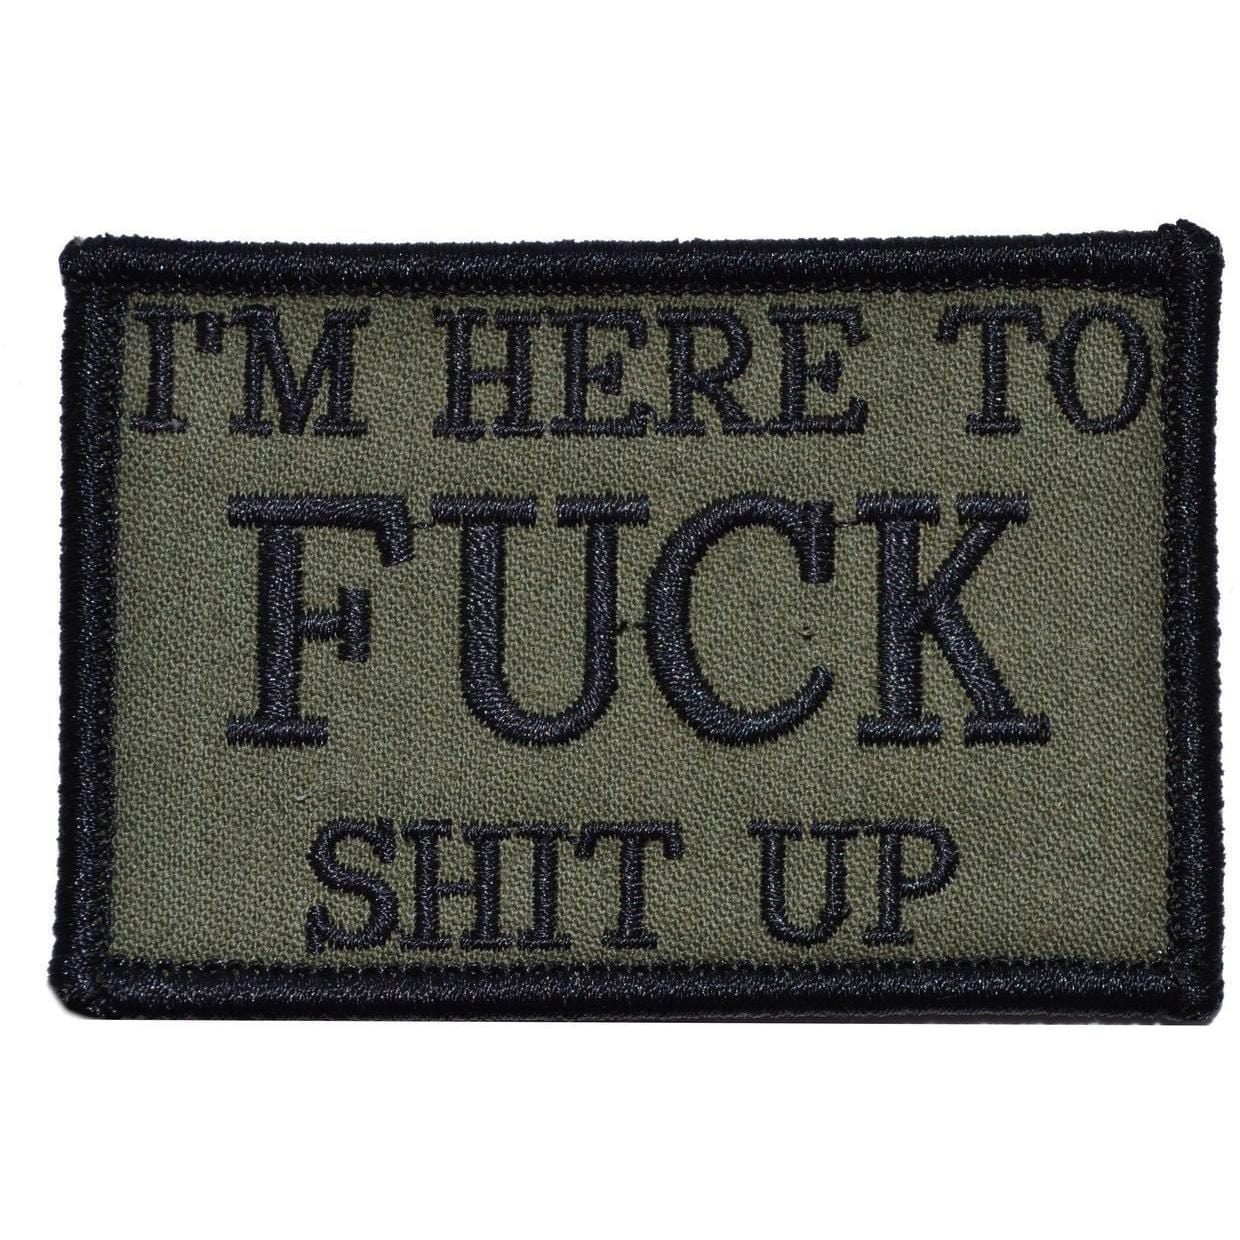 Tactical Gear Junkie Patches Olive Drab I'm Here to Fuck Shit Up - 2x3 Patch